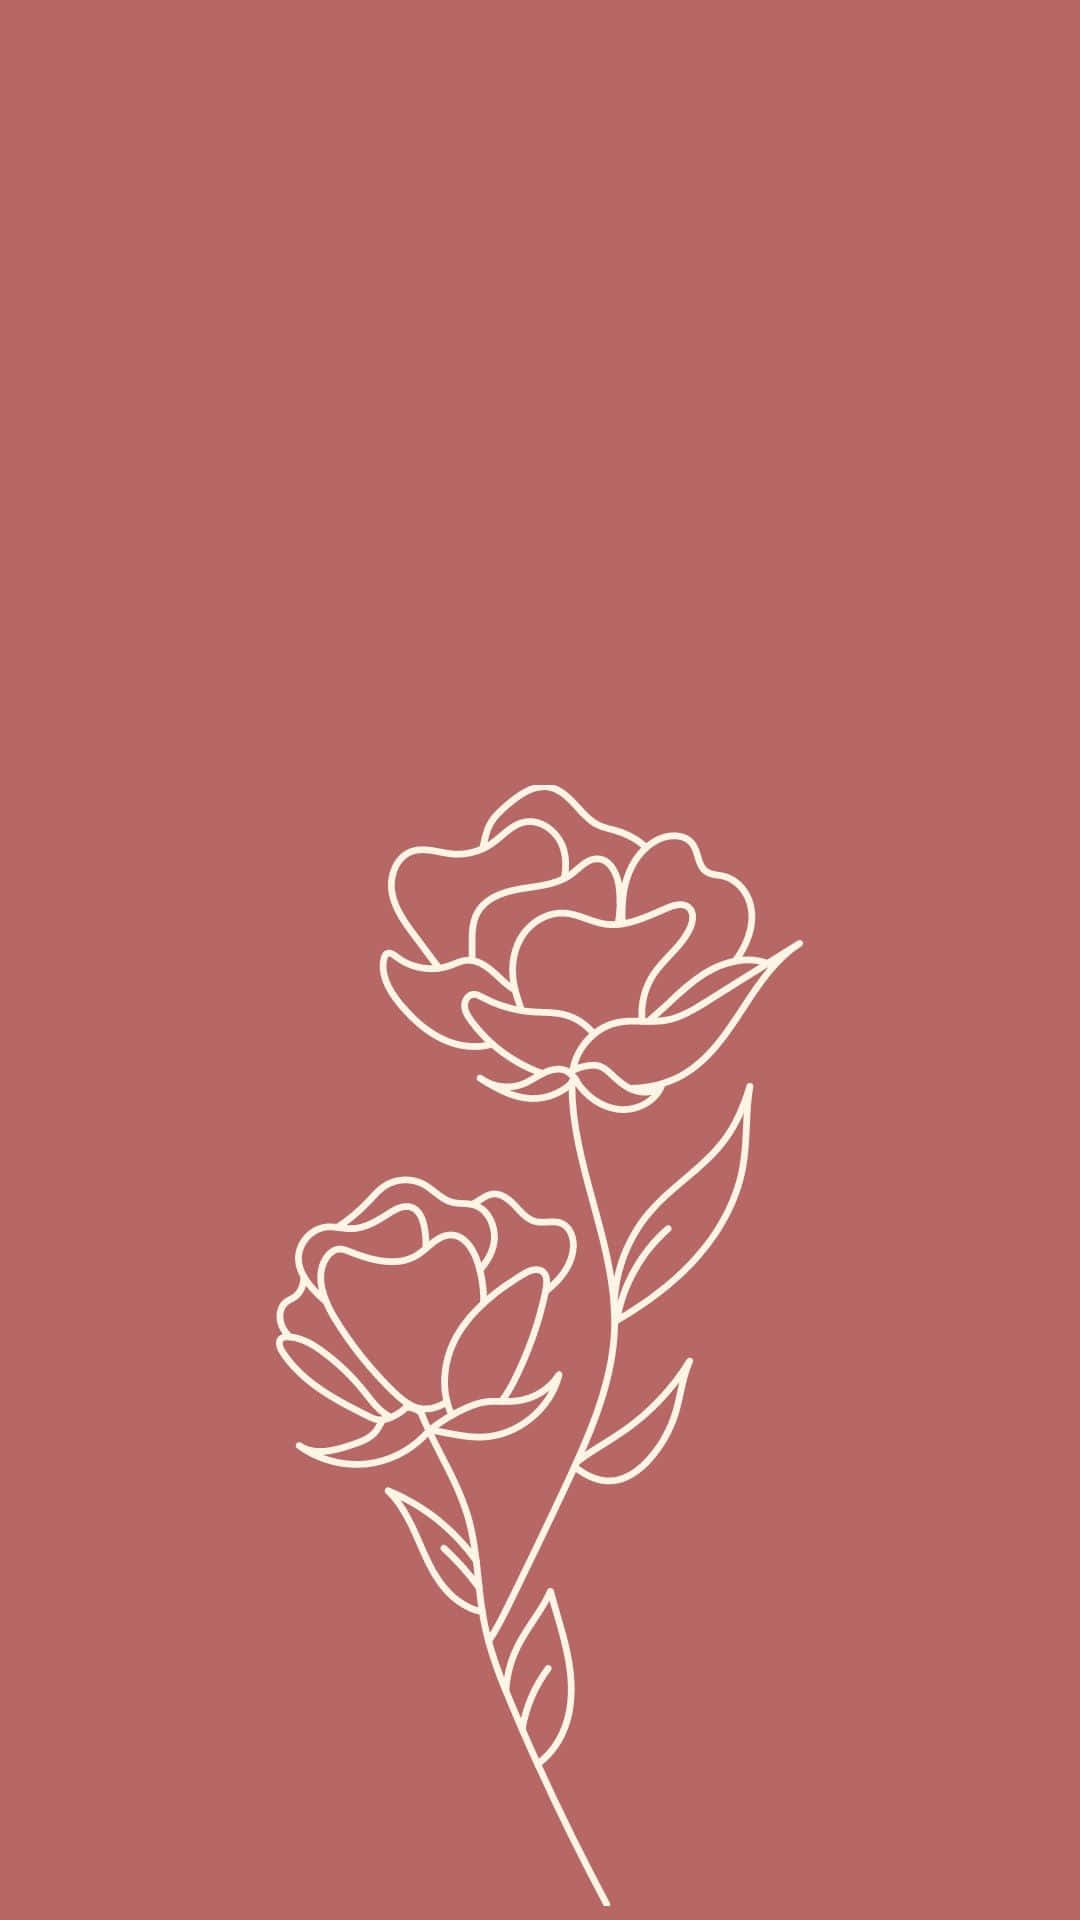 Download Aesthetic Rose Delight | Wallpapers.com